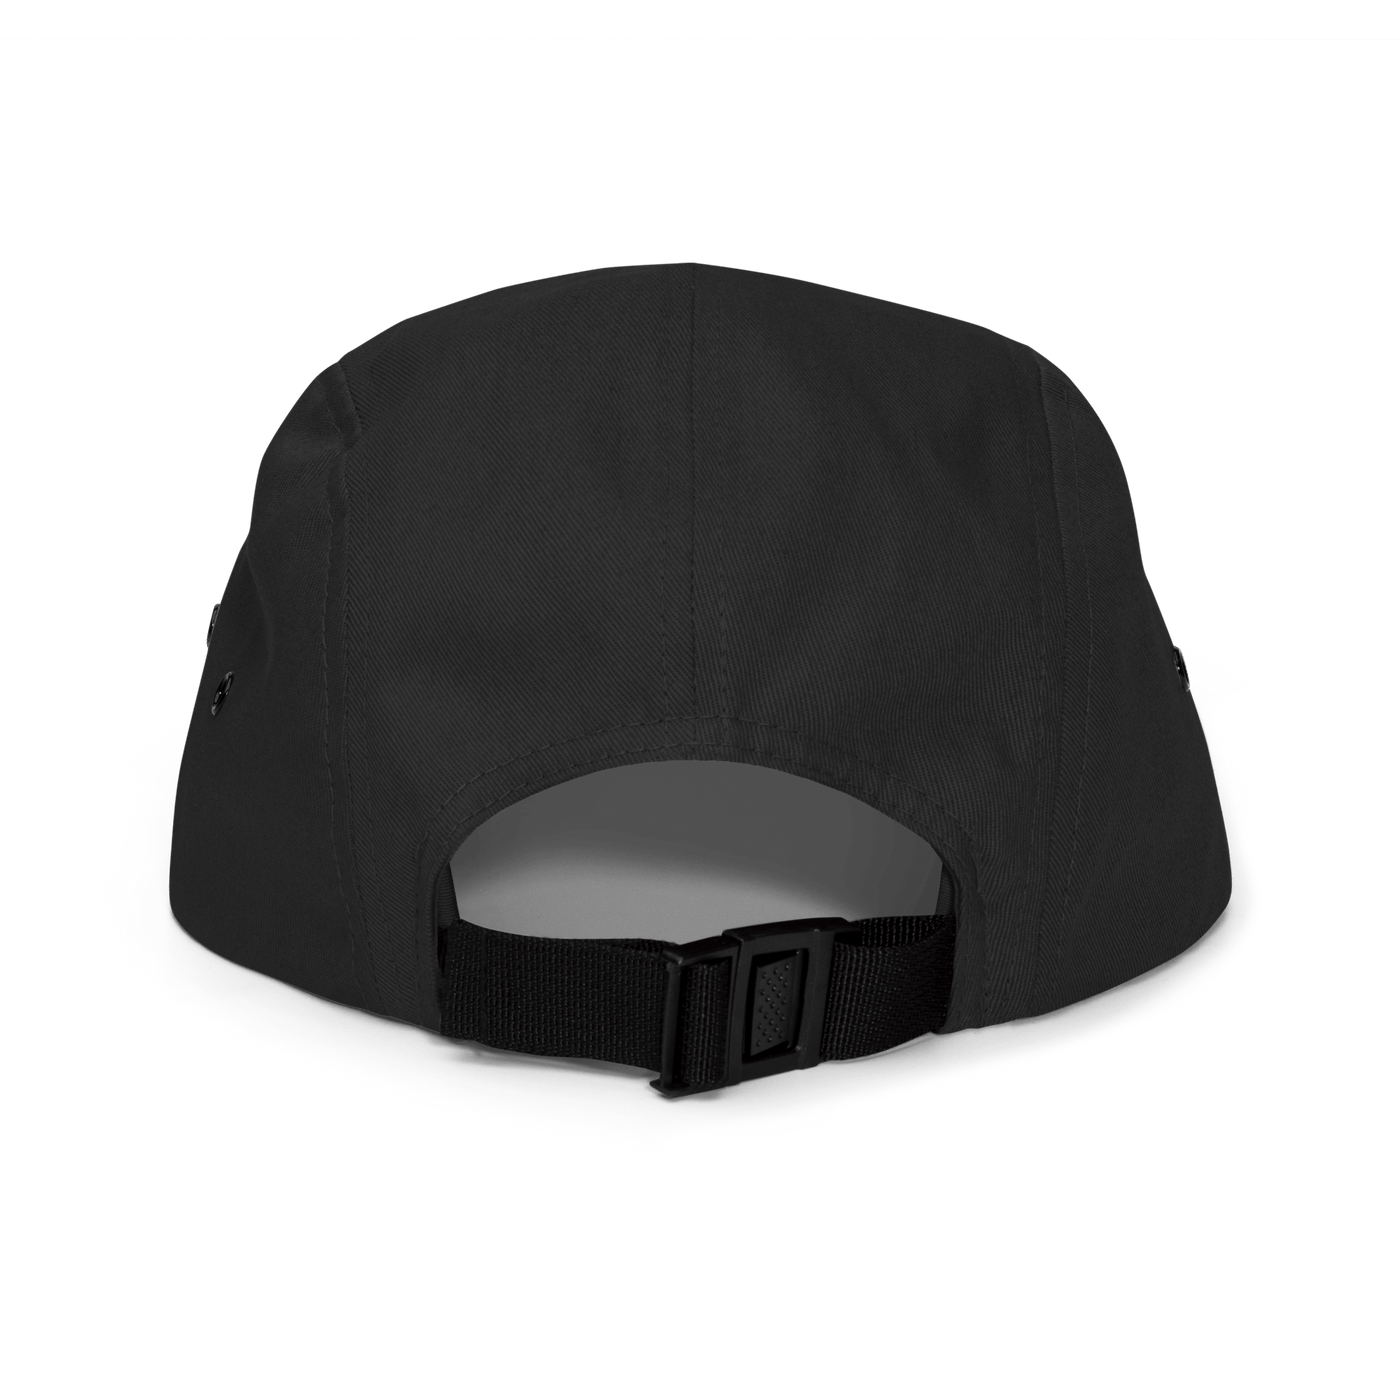 Humanity Runs on Coffee Five Panel Cap - Black - - Just Another Cap Store